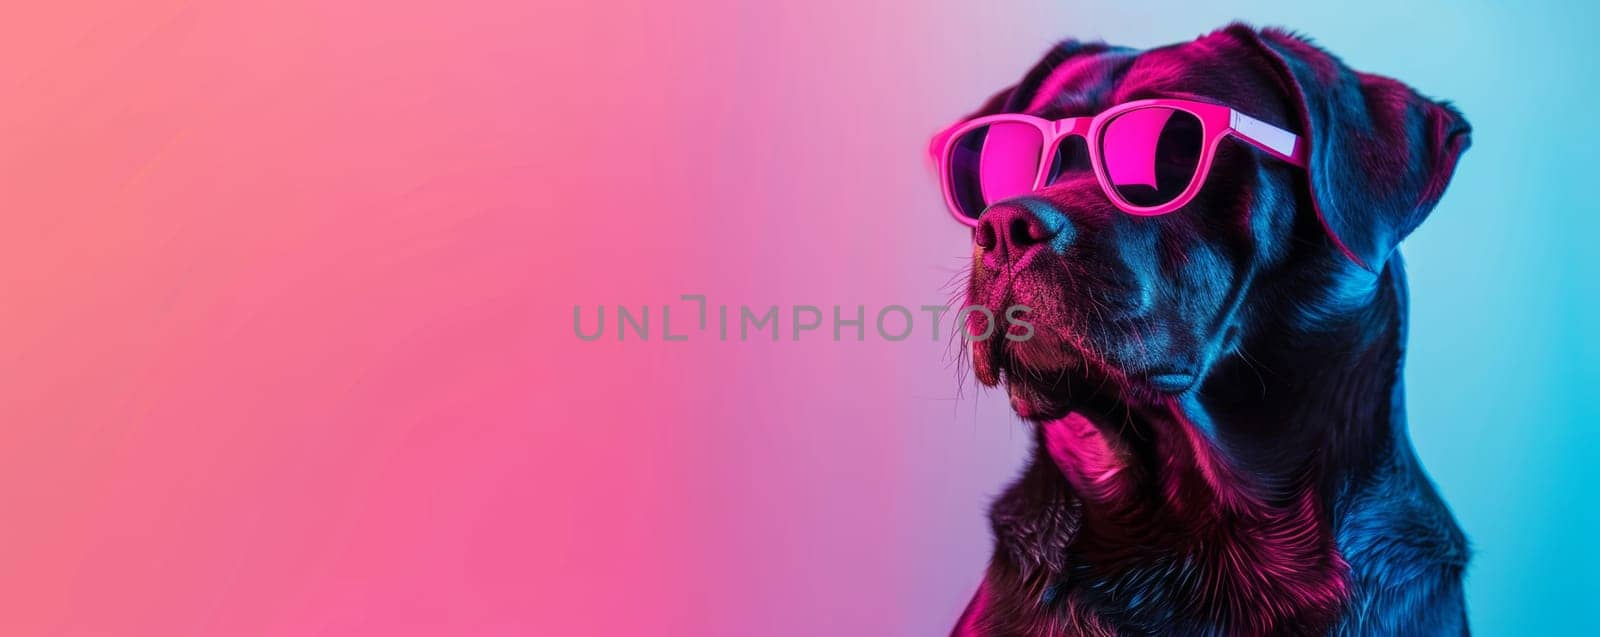 Black dog wearing pink sunglasses against a neon pink and blue background by Anastasiia